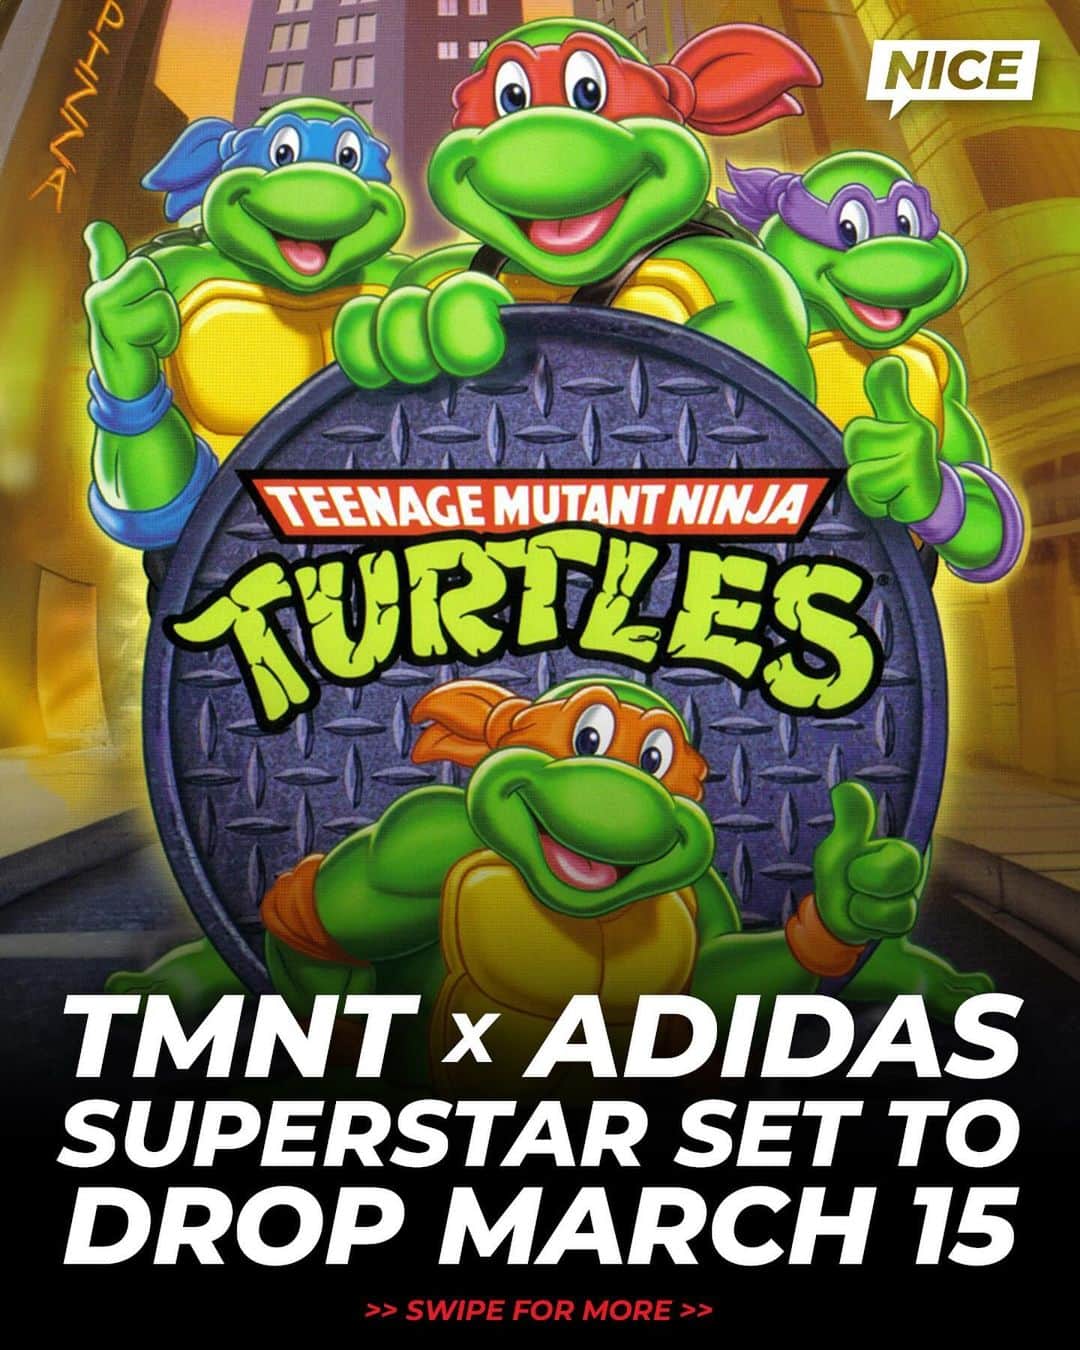 Nice Kicksのインスタグラム：「The Teenage Mutant Ninja Turtles and adidas are teaming up to release a collaborative Superstar in 2024 🐢🥷  This will be the first of three TMNT x adidas Superstars with the other two being Master Splinter and Shredder-inspired colorways 🔥  @nicedrops: 3/15 for $130 🗓️」